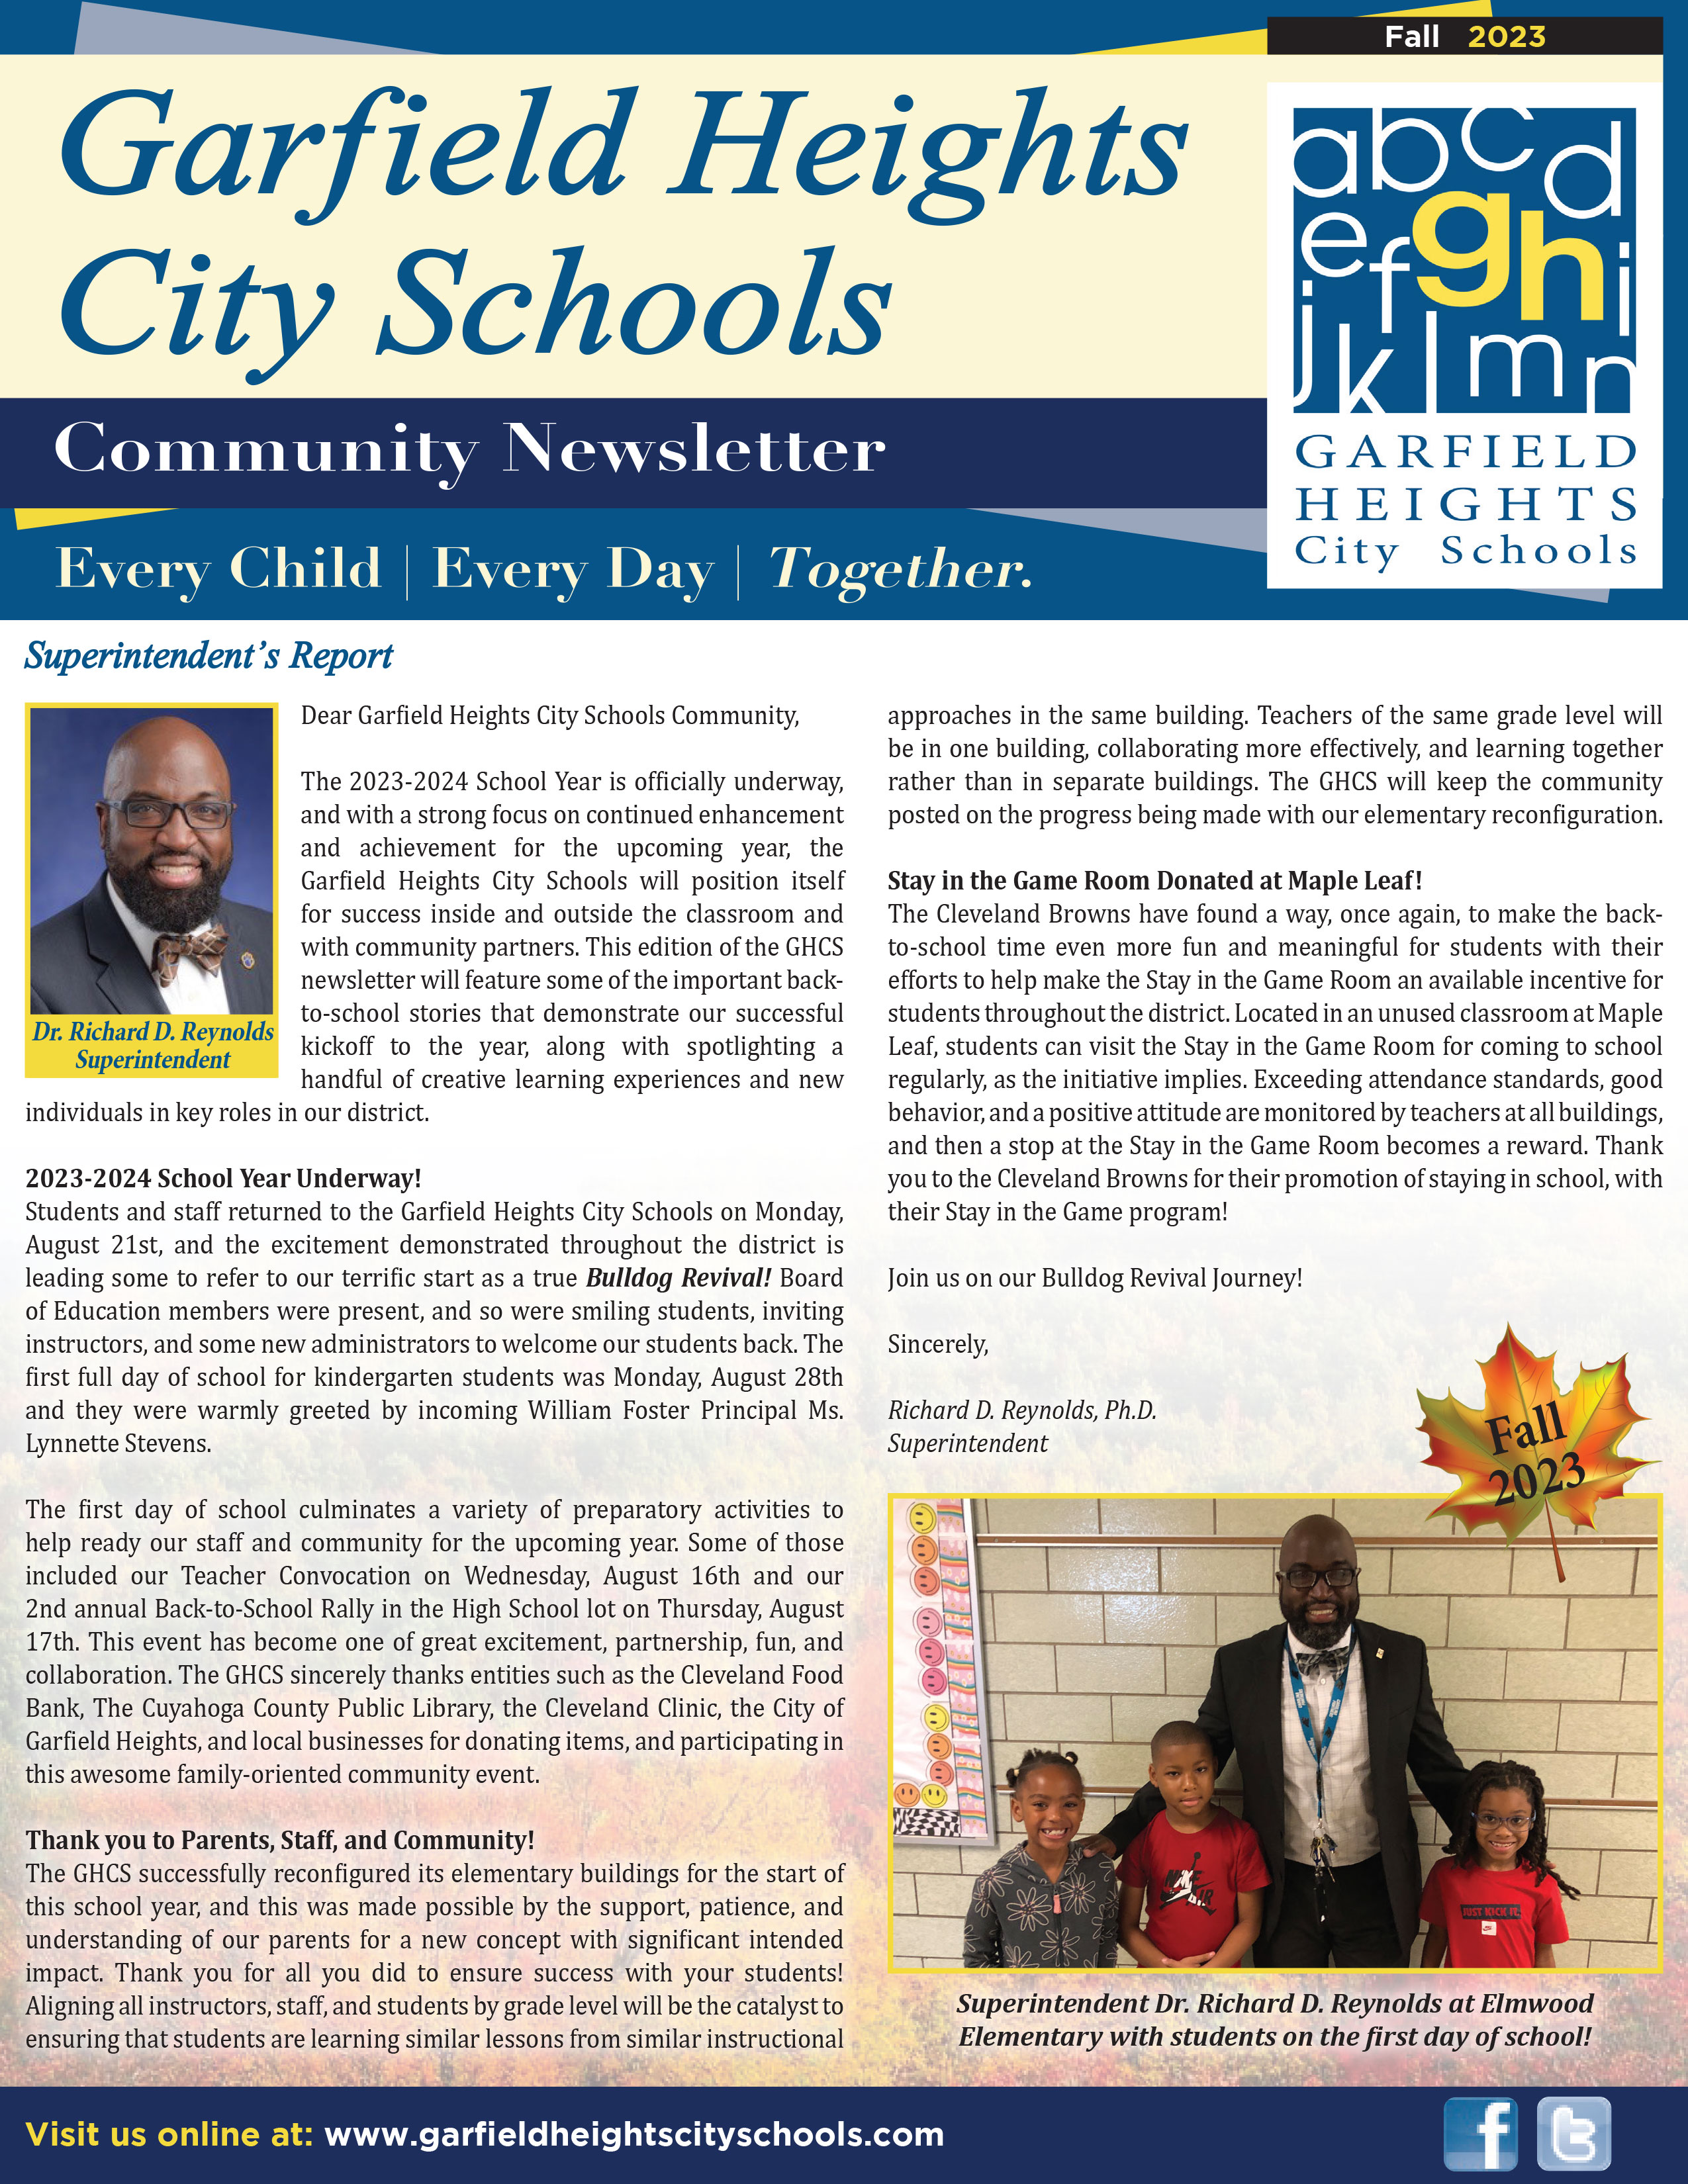 GHCS Fall 2023 Newsletter